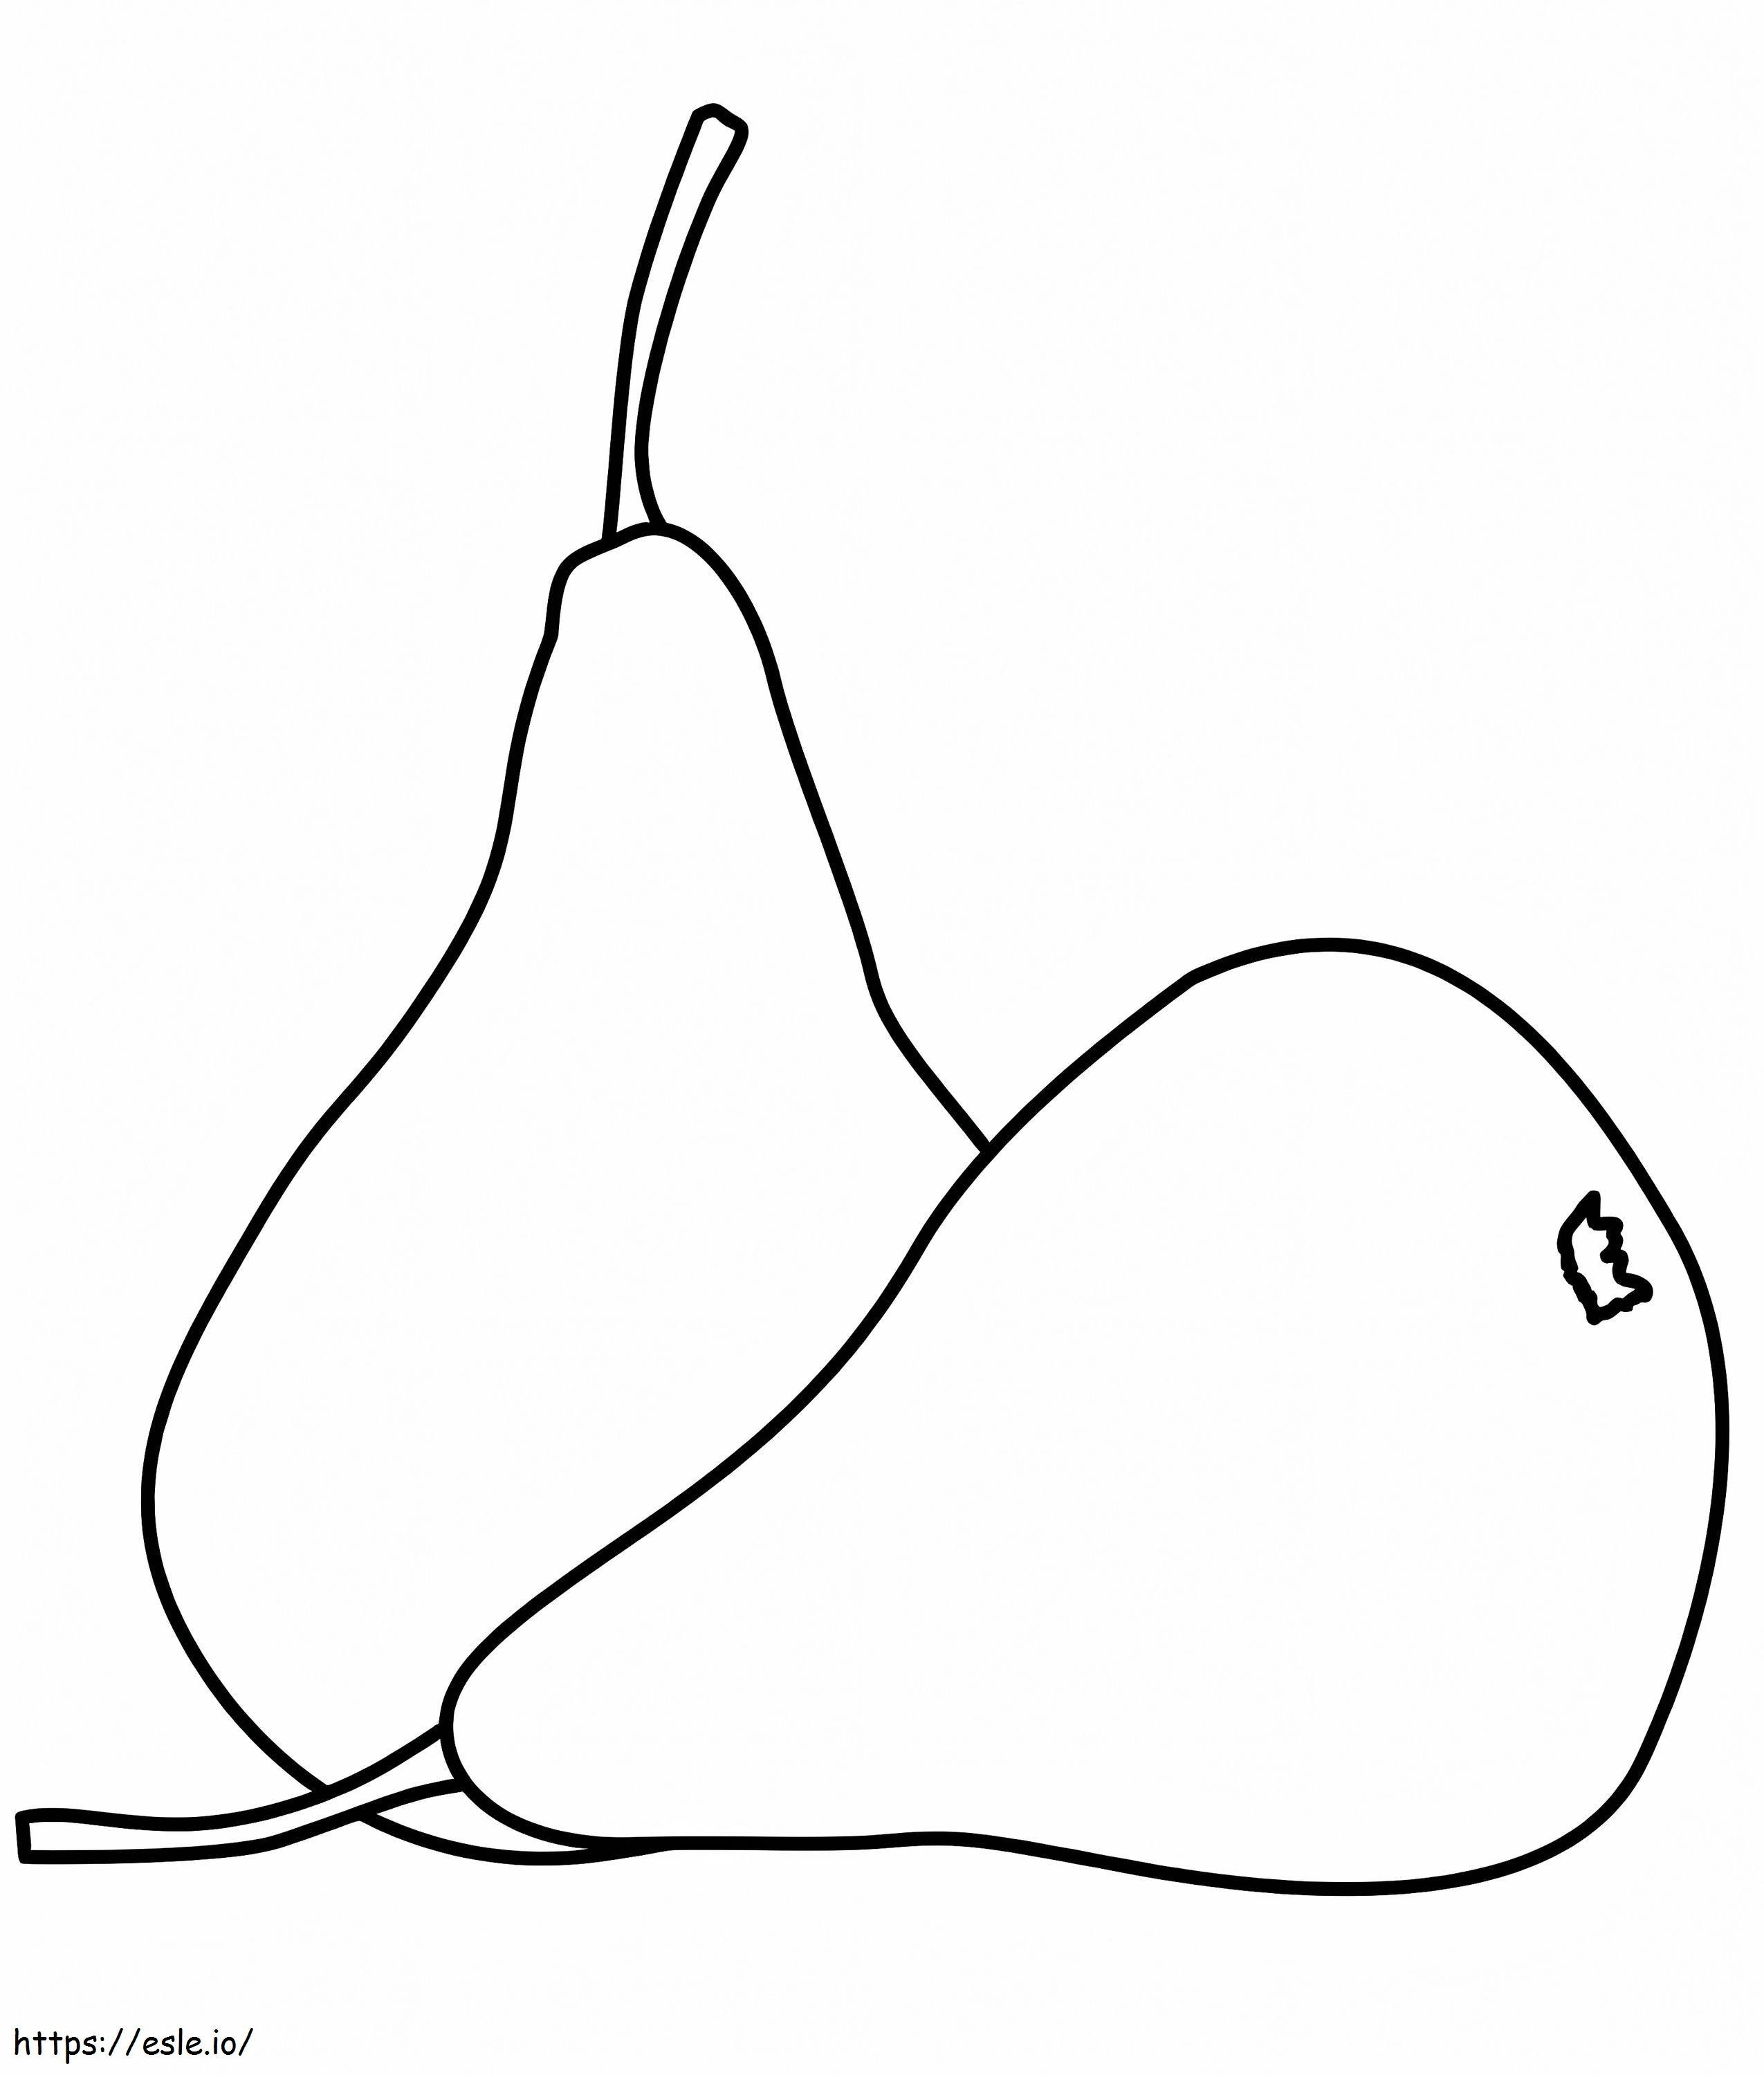 Two Pears coloring page